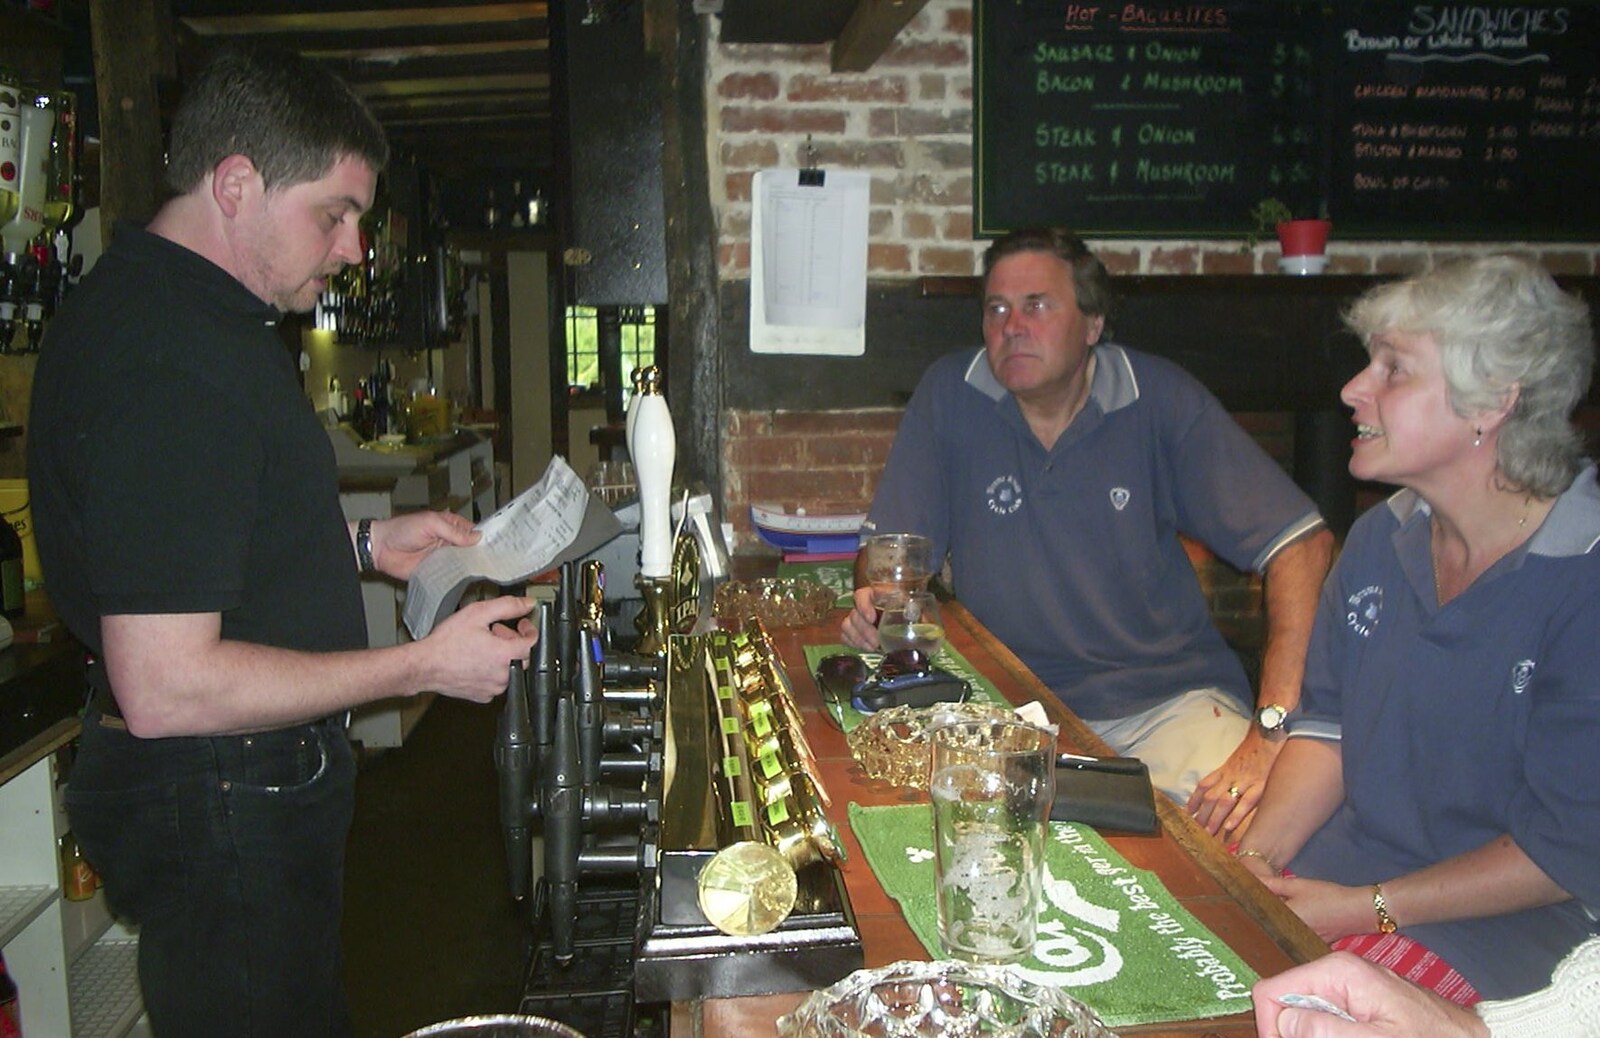 The bar dude checks a menu from The BSCC Annual Bike Ride, Marquess of Exeter, Oakham, Rutland - 12th May 2001